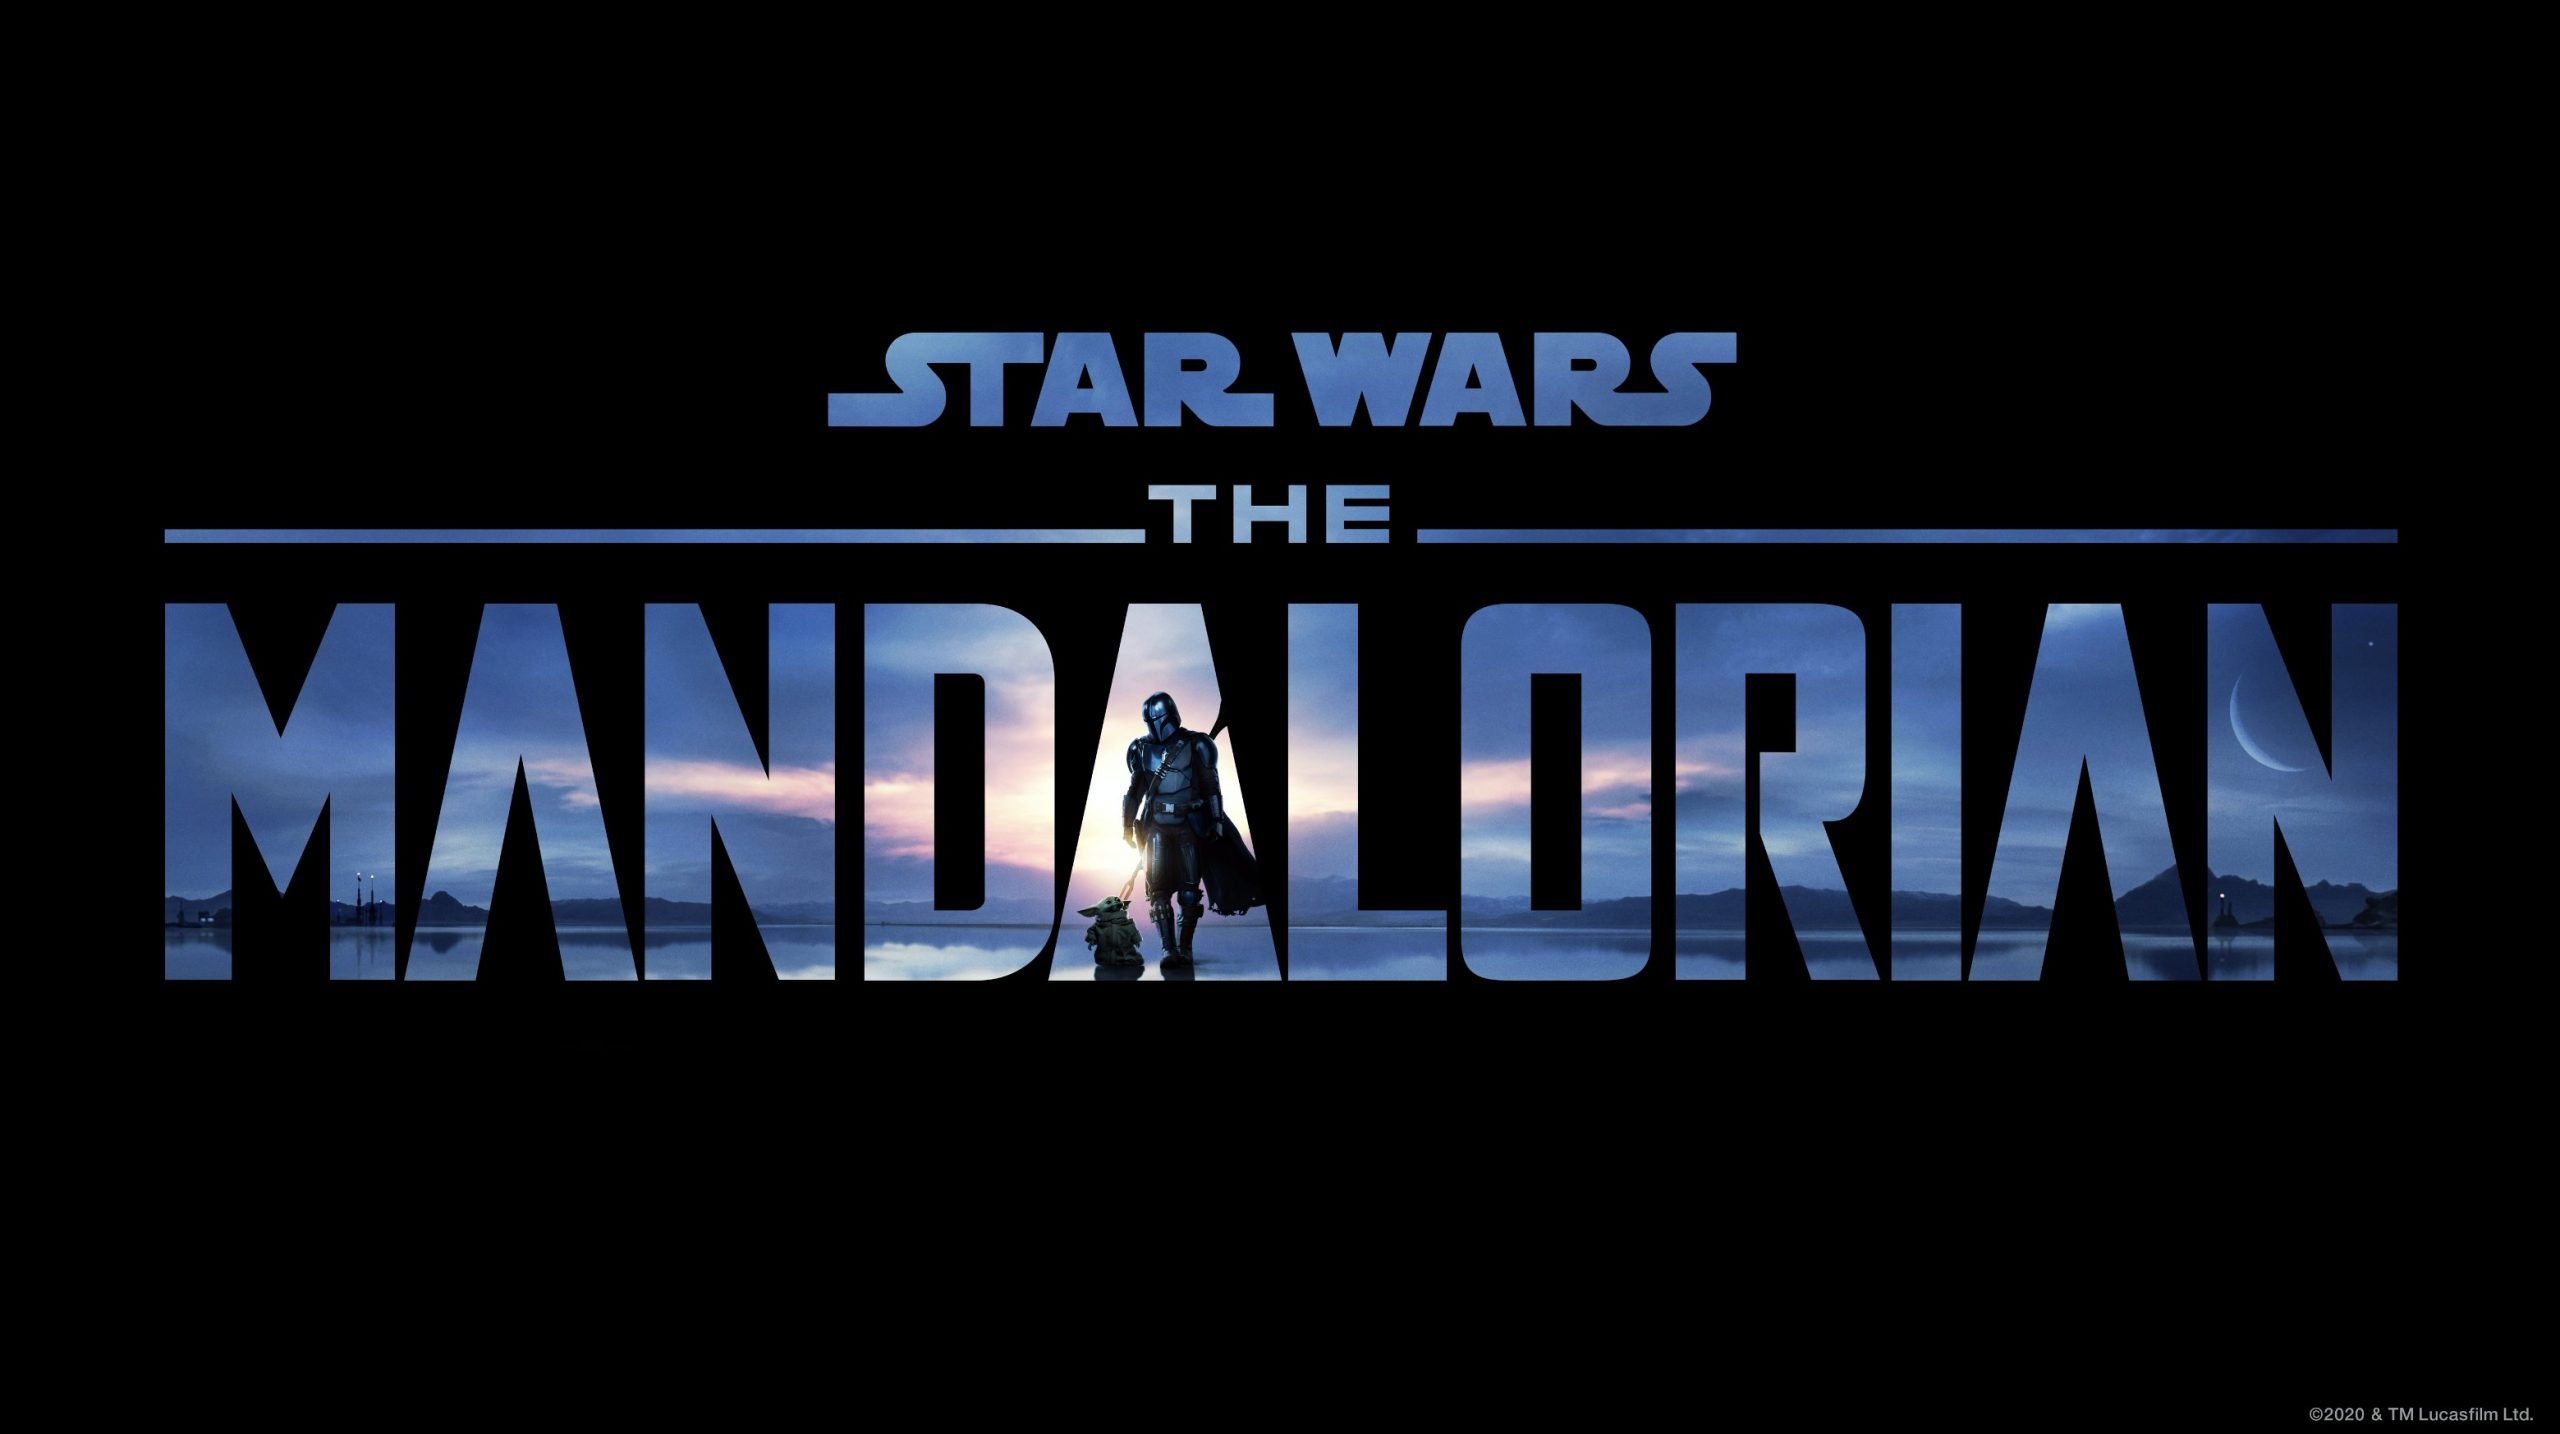 The Mandalorian' Season 2 Streaming Numbers Reveal a Strong Debut